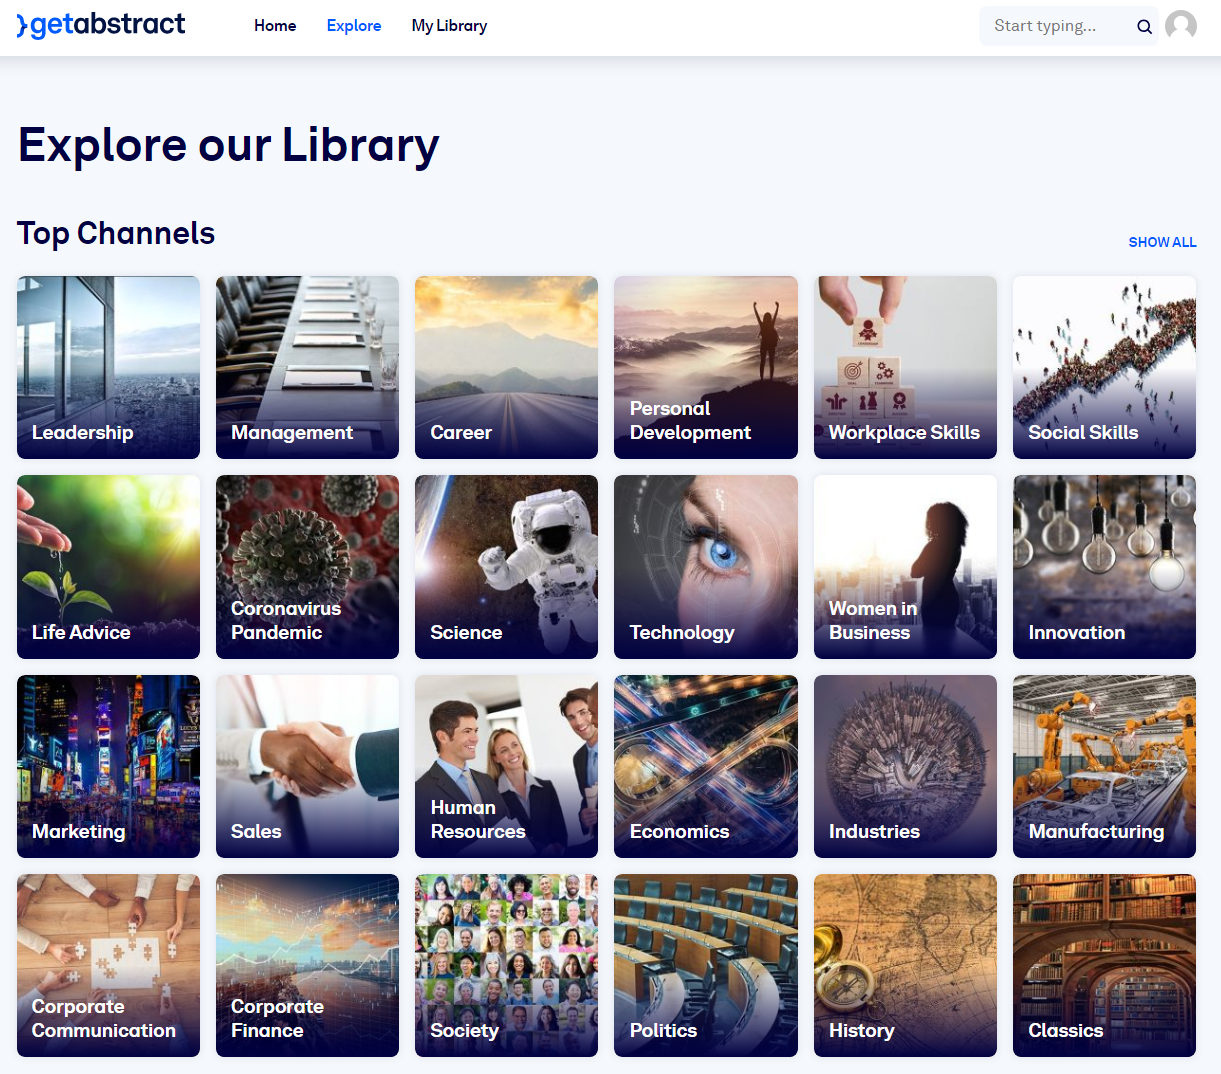 Explore our Library